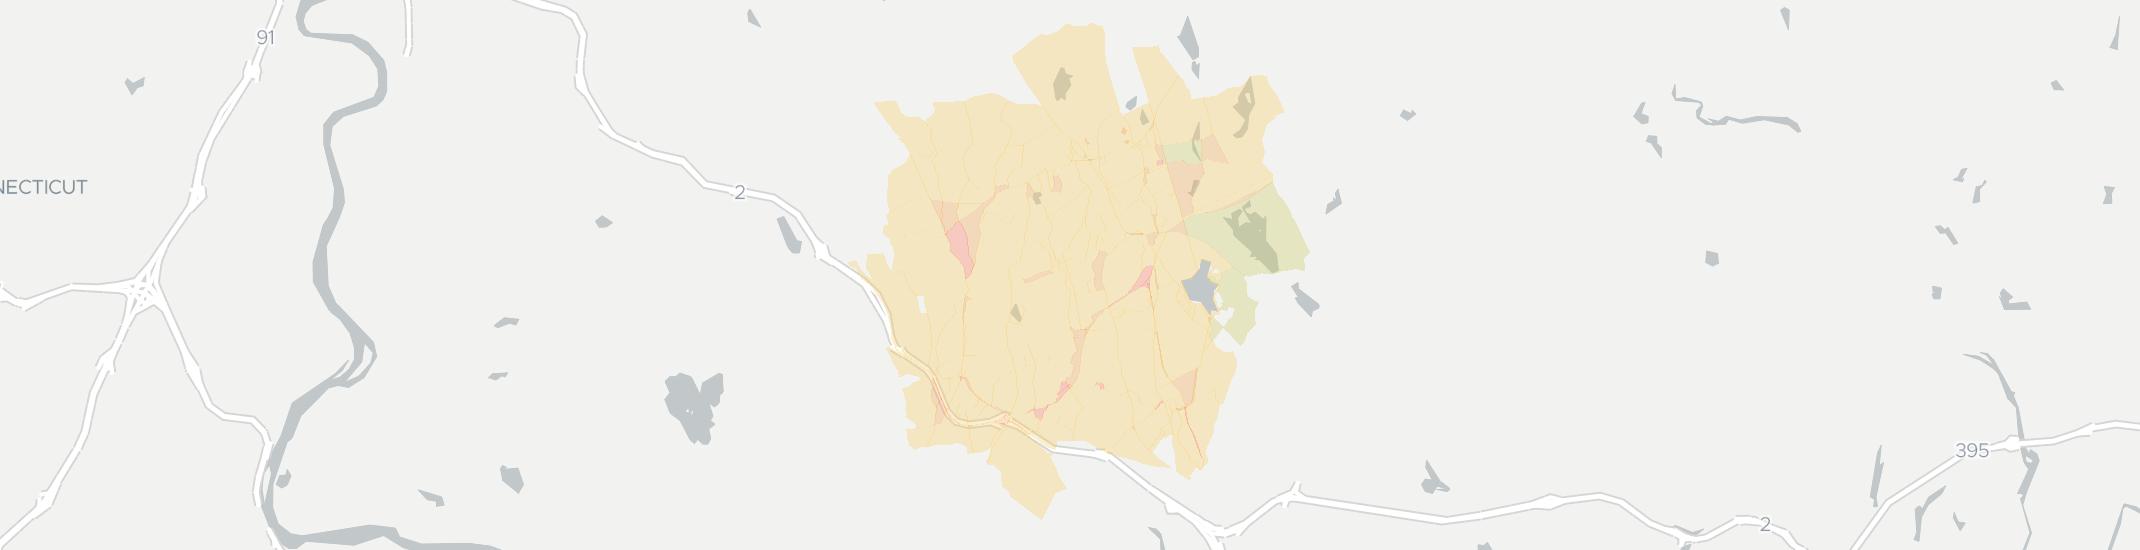 Amston Internet Competition Map. Click for interactive map